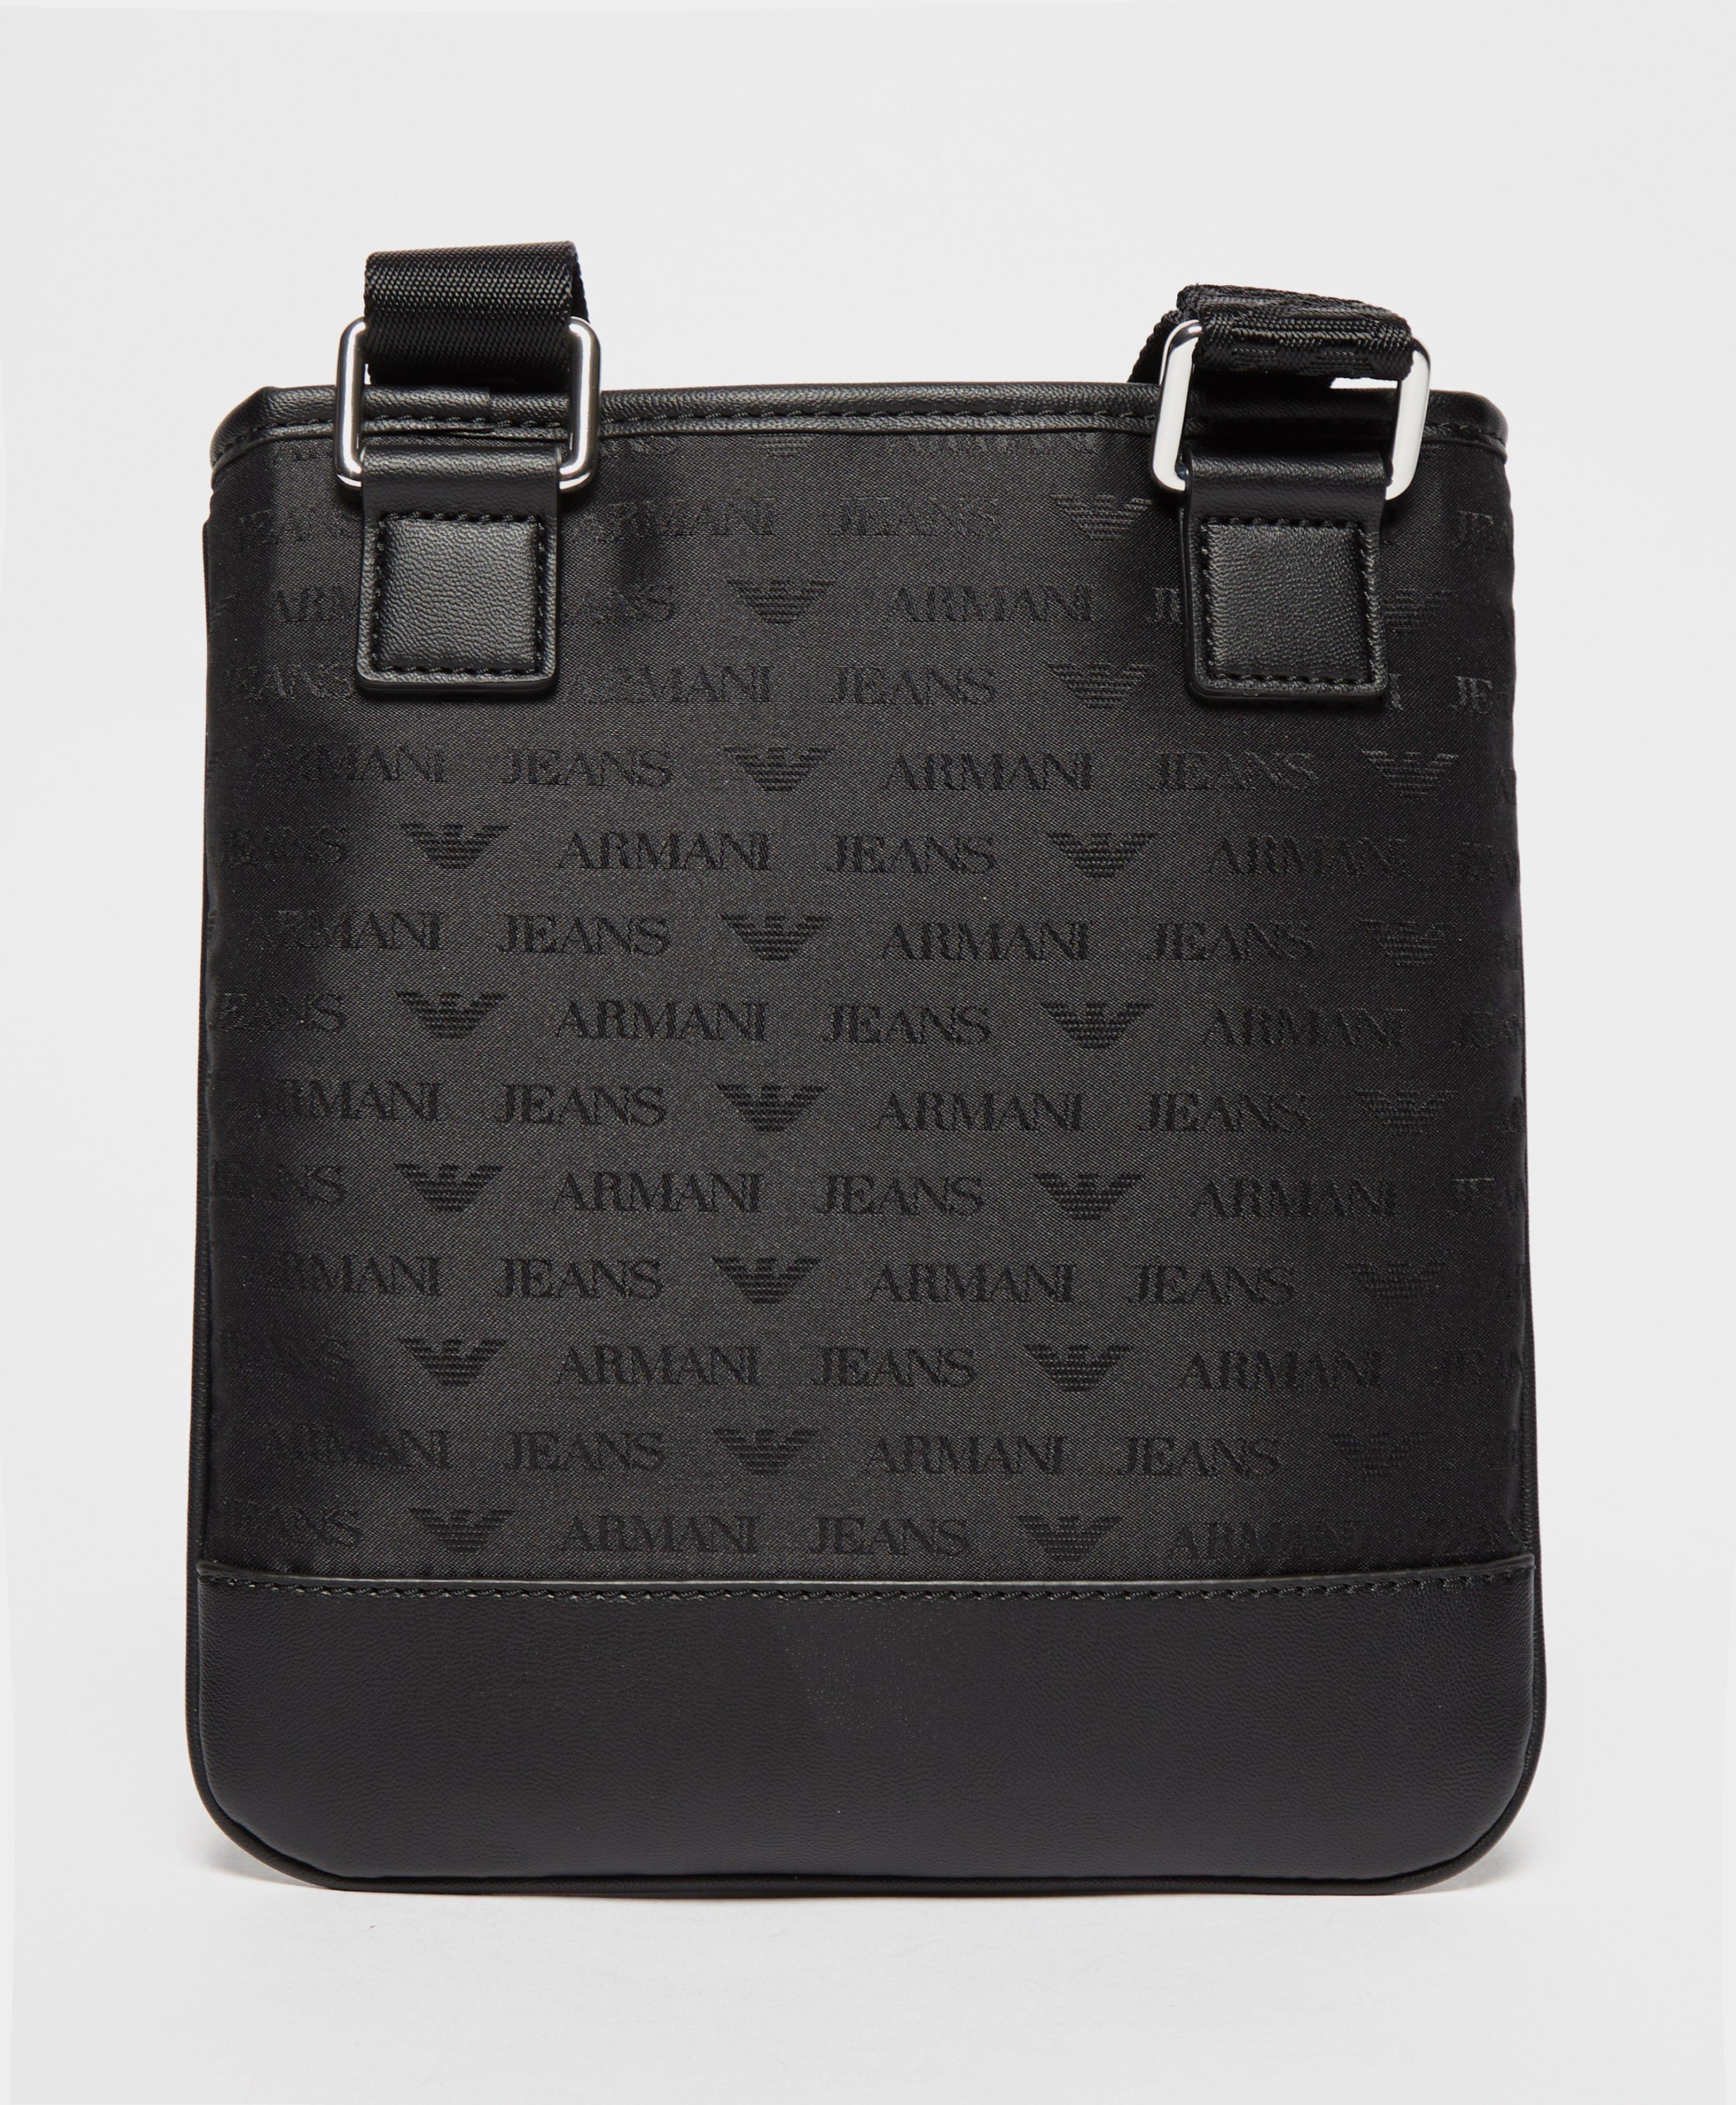 Armani Jeans Synthetic Small Nylon Bag in Black for Men - Lyst